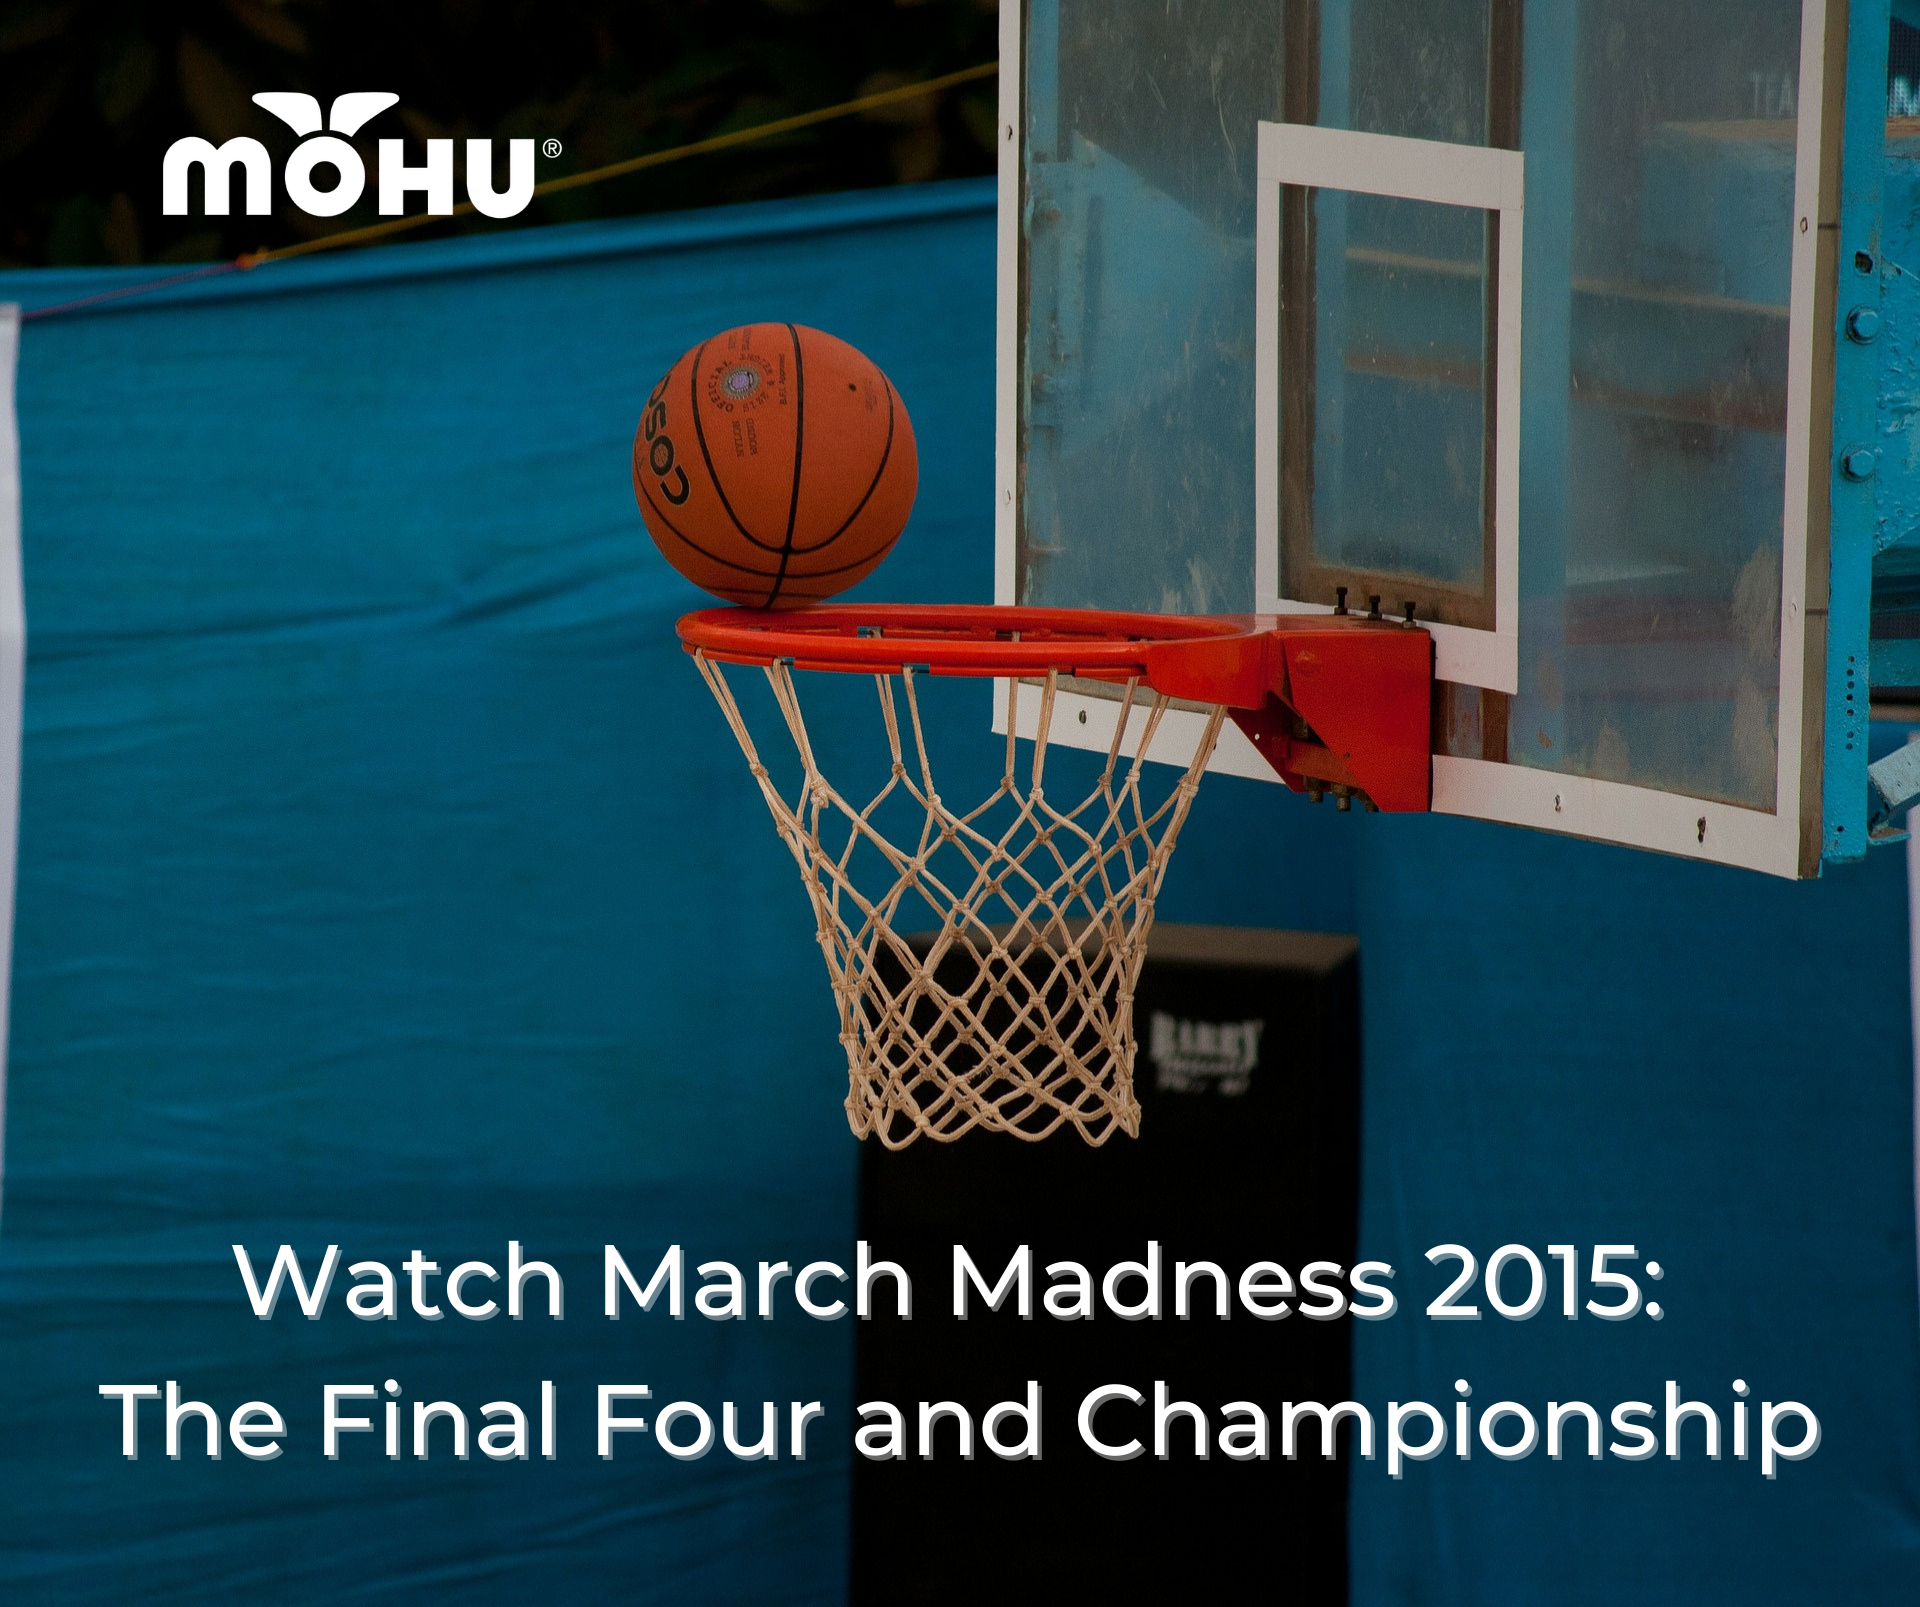 Basketball going into a basketball hoop, Mohu, Watch March Madness 2015: The Final Four and Championship